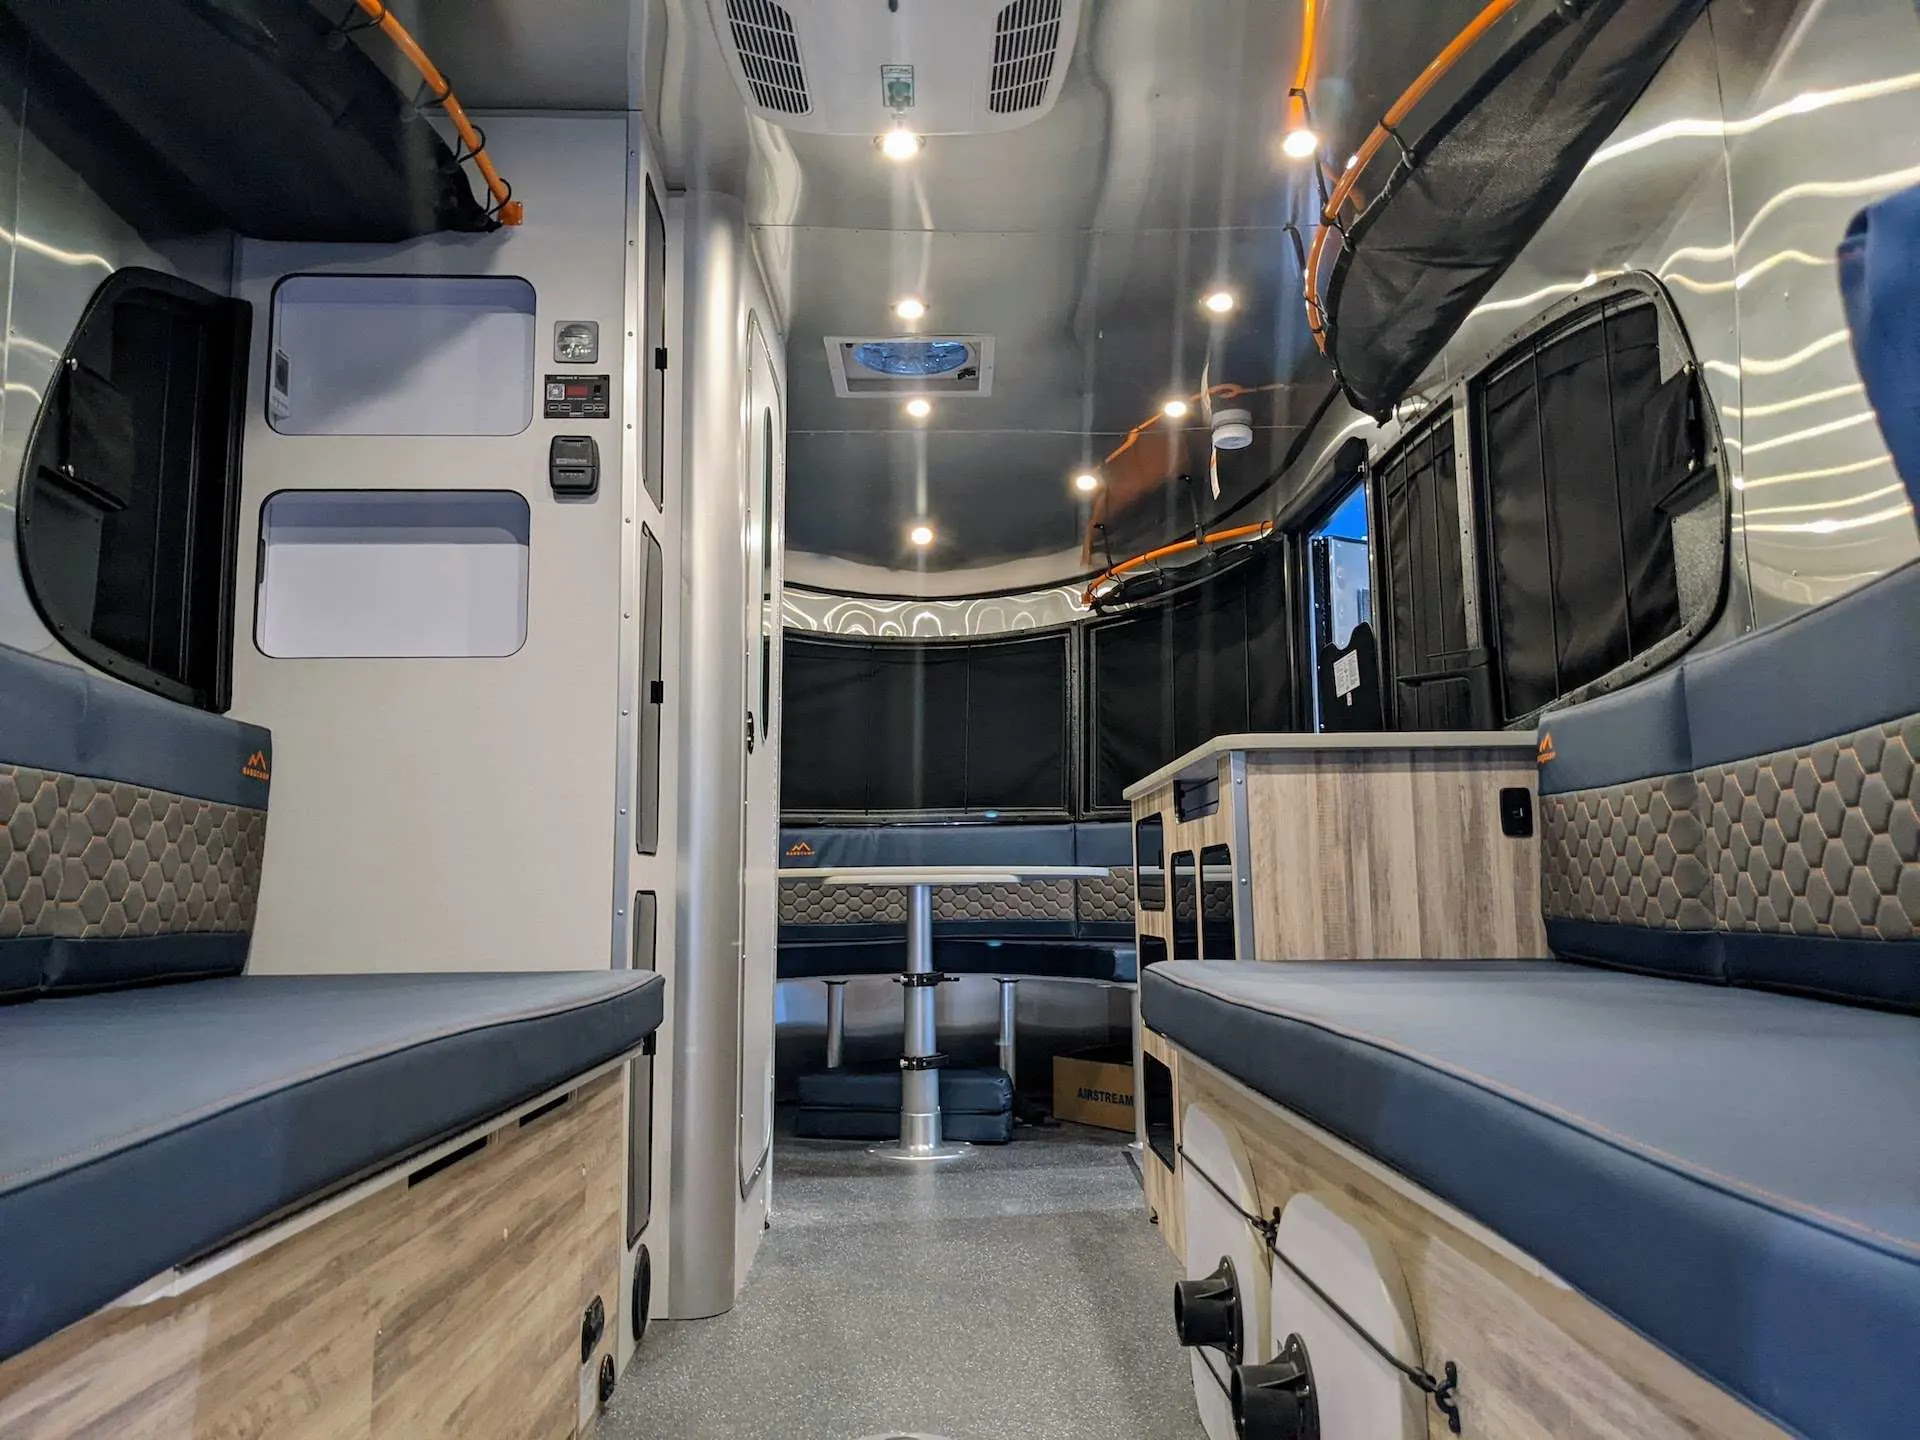 Interior of the airstream basecamp